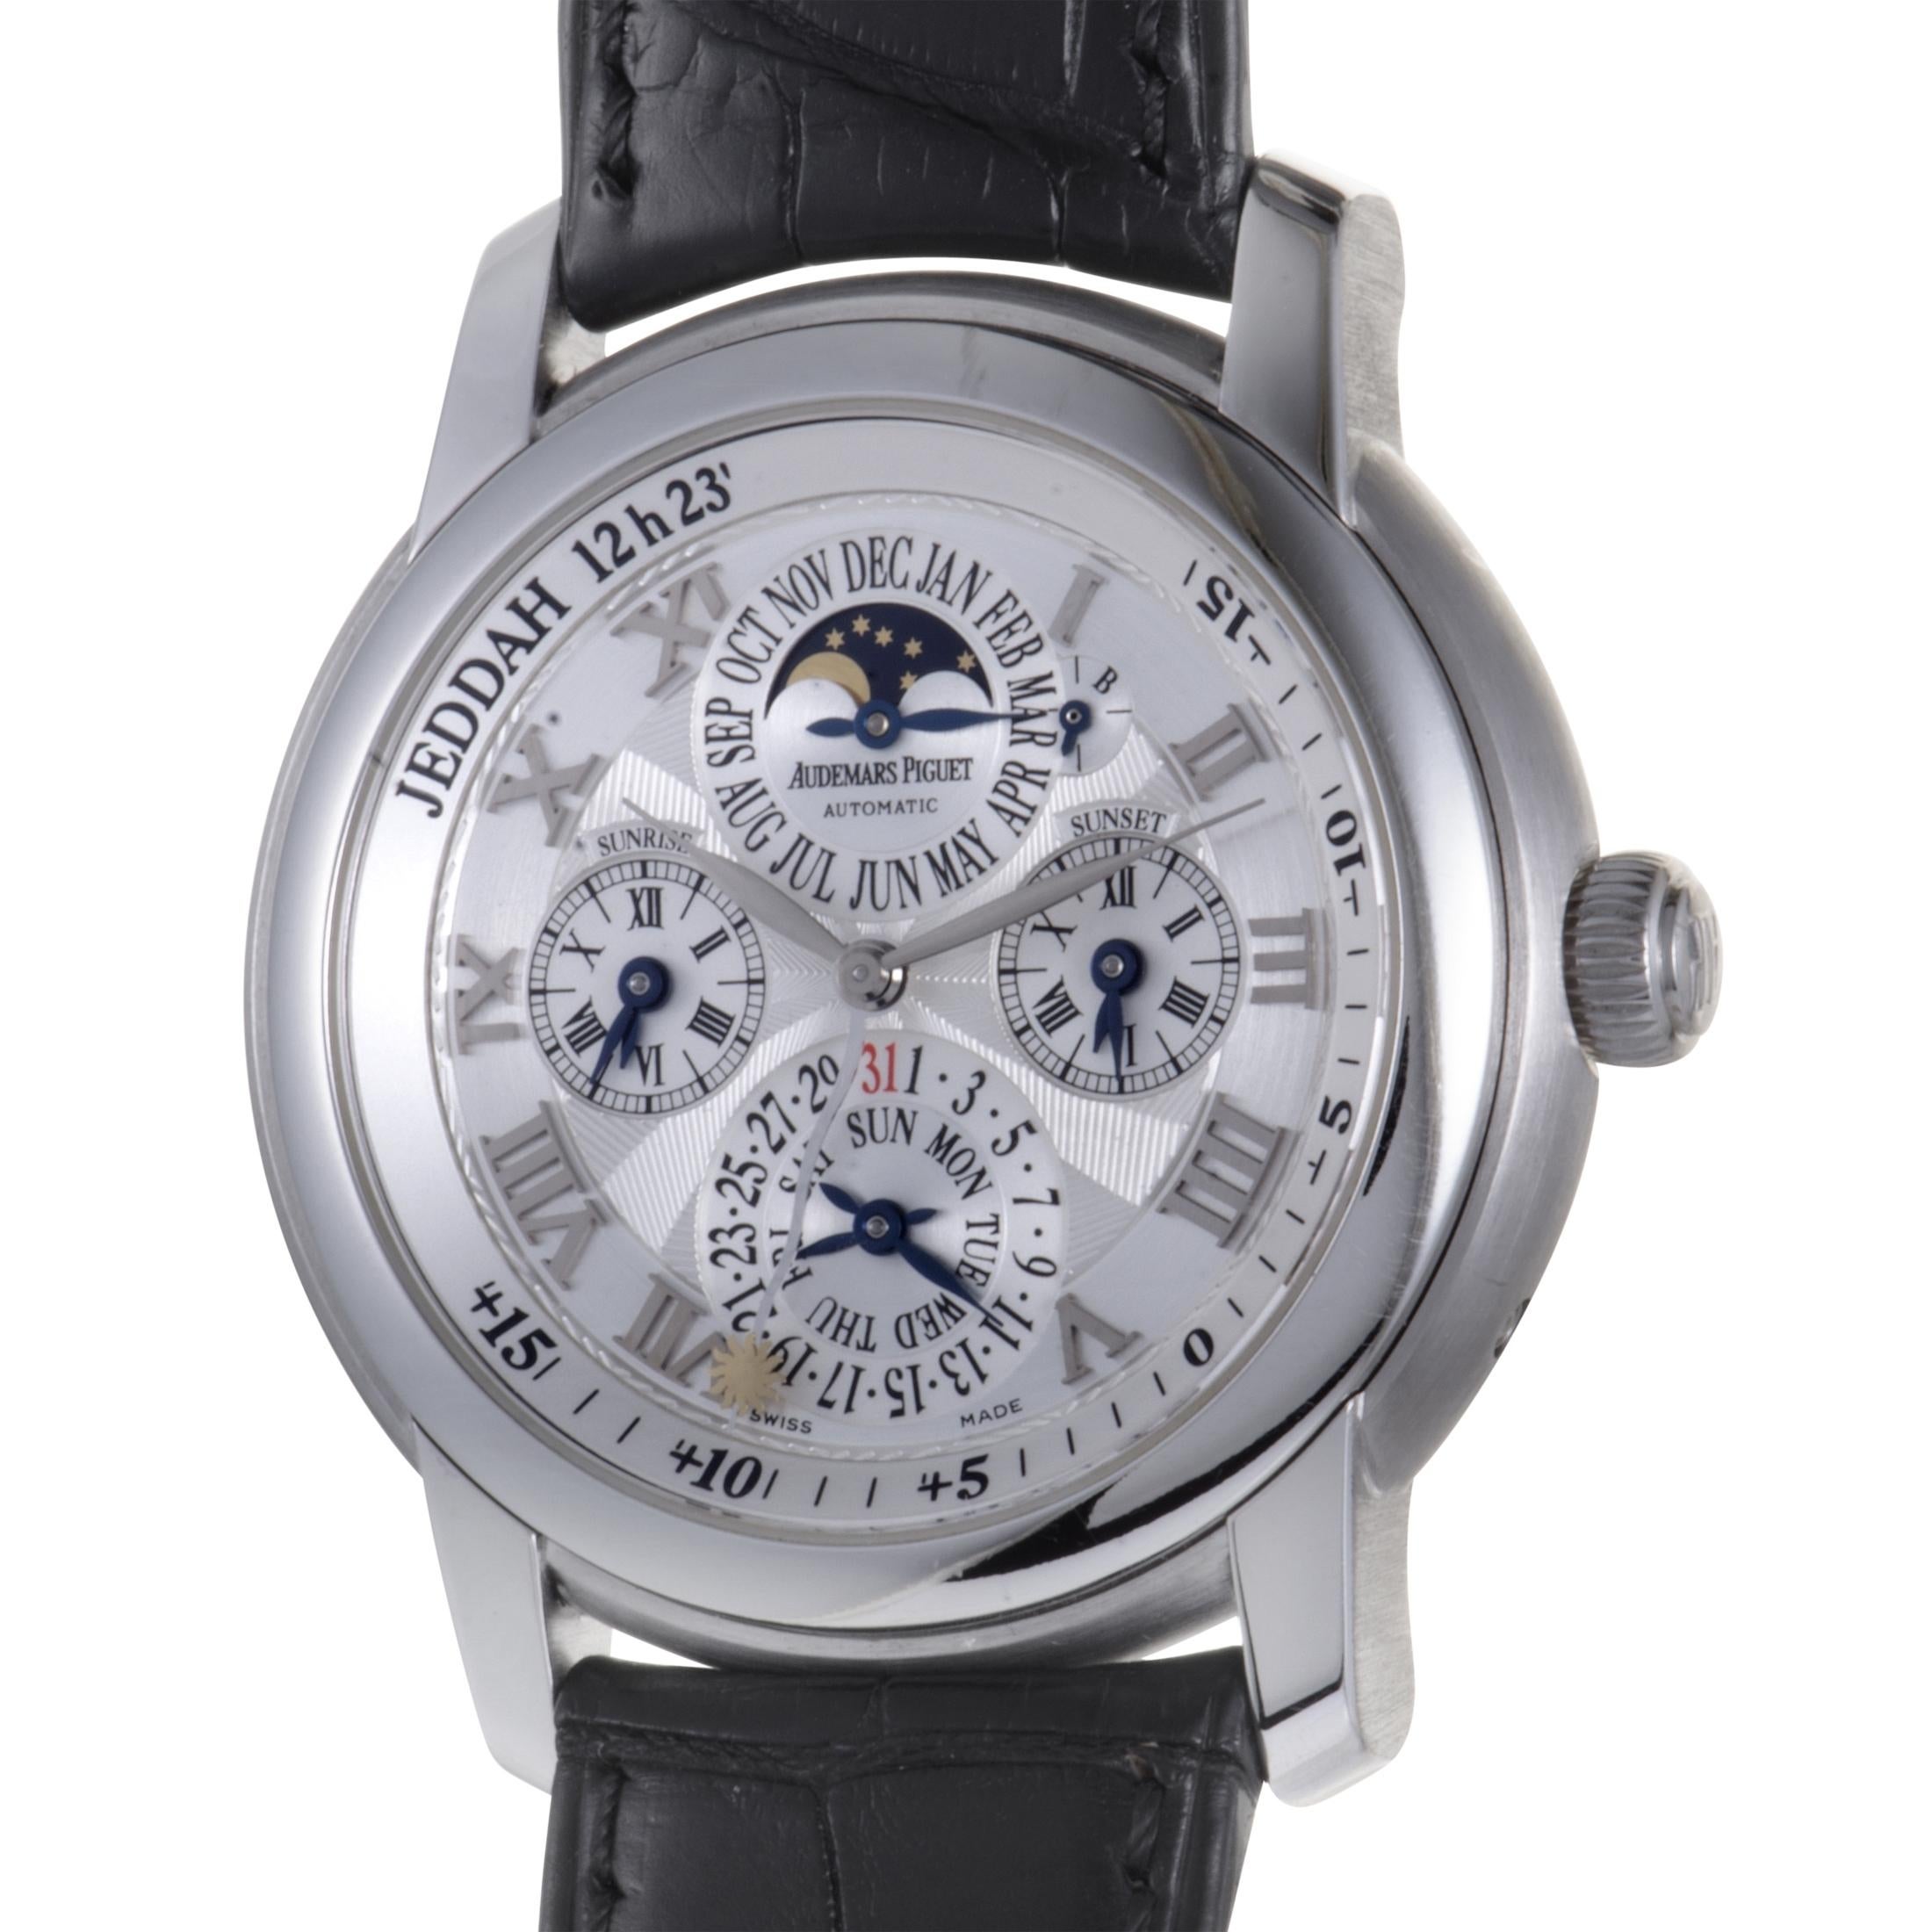 Presenting an astonishing number of indications upon a brilliantly arranged dial which offers excellent legibility along with an attractive visual effect, this elegant timepiece from Audemars Piguet boasts an appearance of classis refinement and